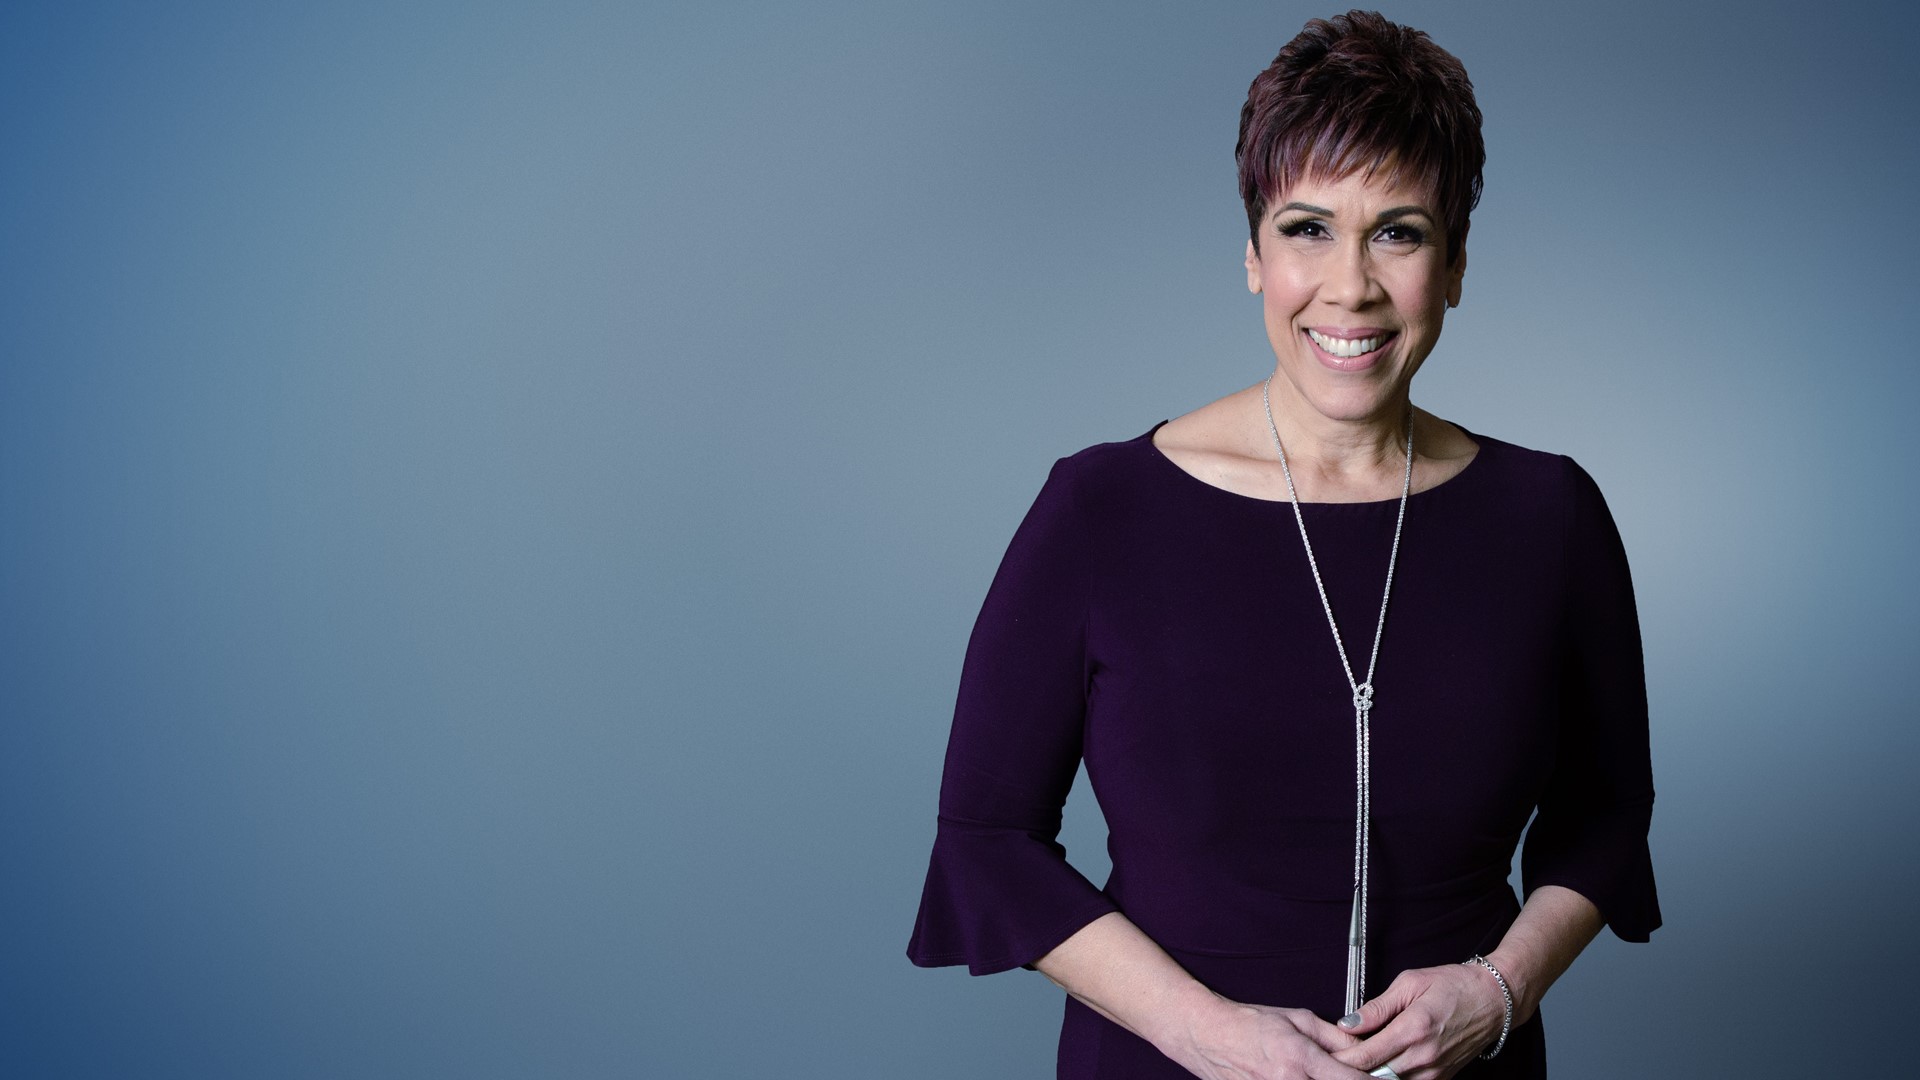 After more than three decades at KGW, Brenda Braxton will be leaving the station on November 22.